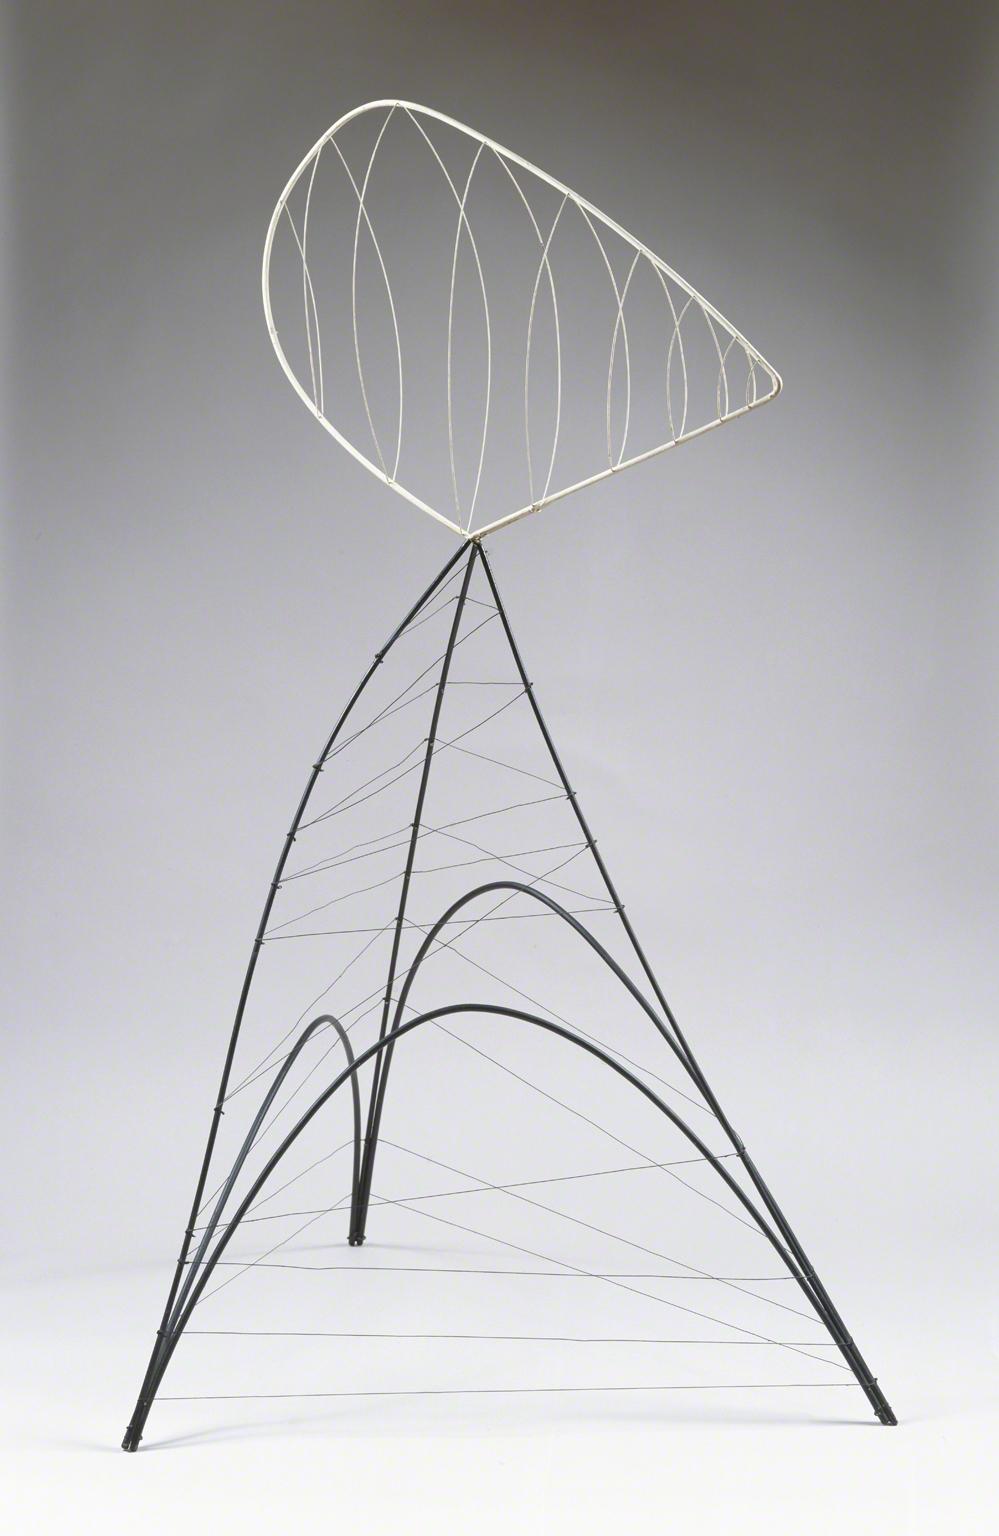 A sculpture made of wire with white shape on the top and black on the bottom